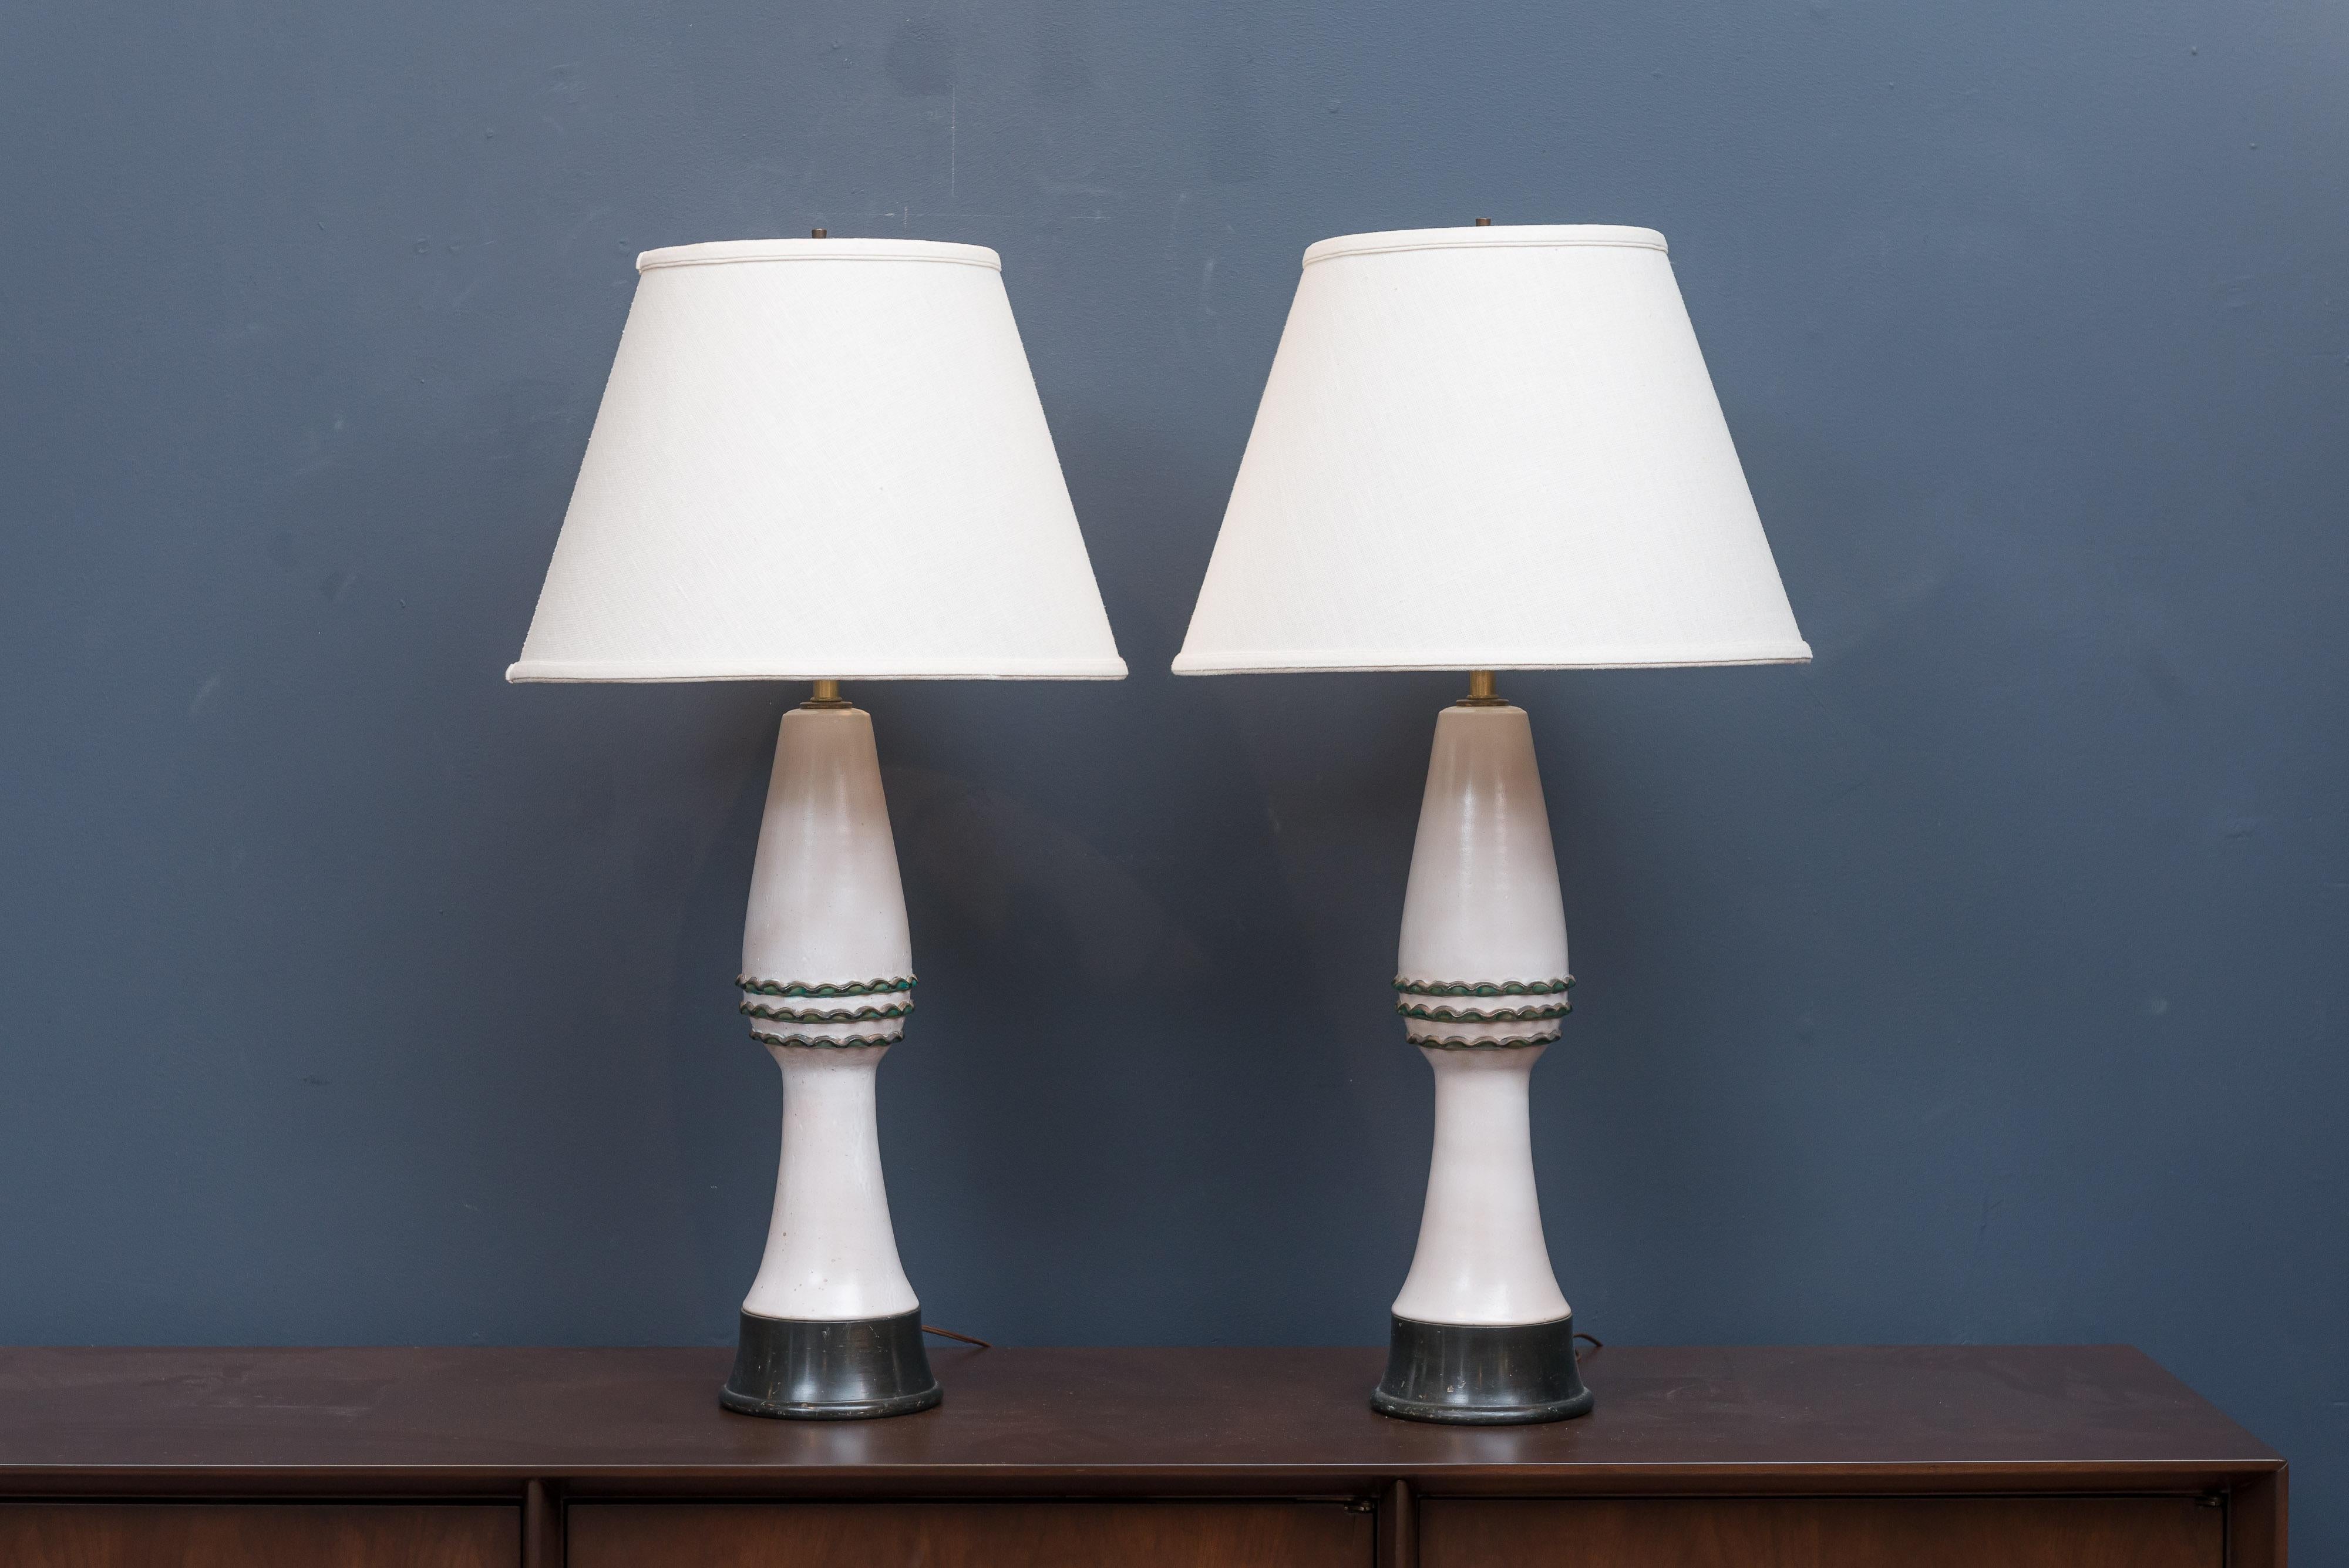 Pair of midcentury ceramic table lamps by Wilshire House, Los Angeles.